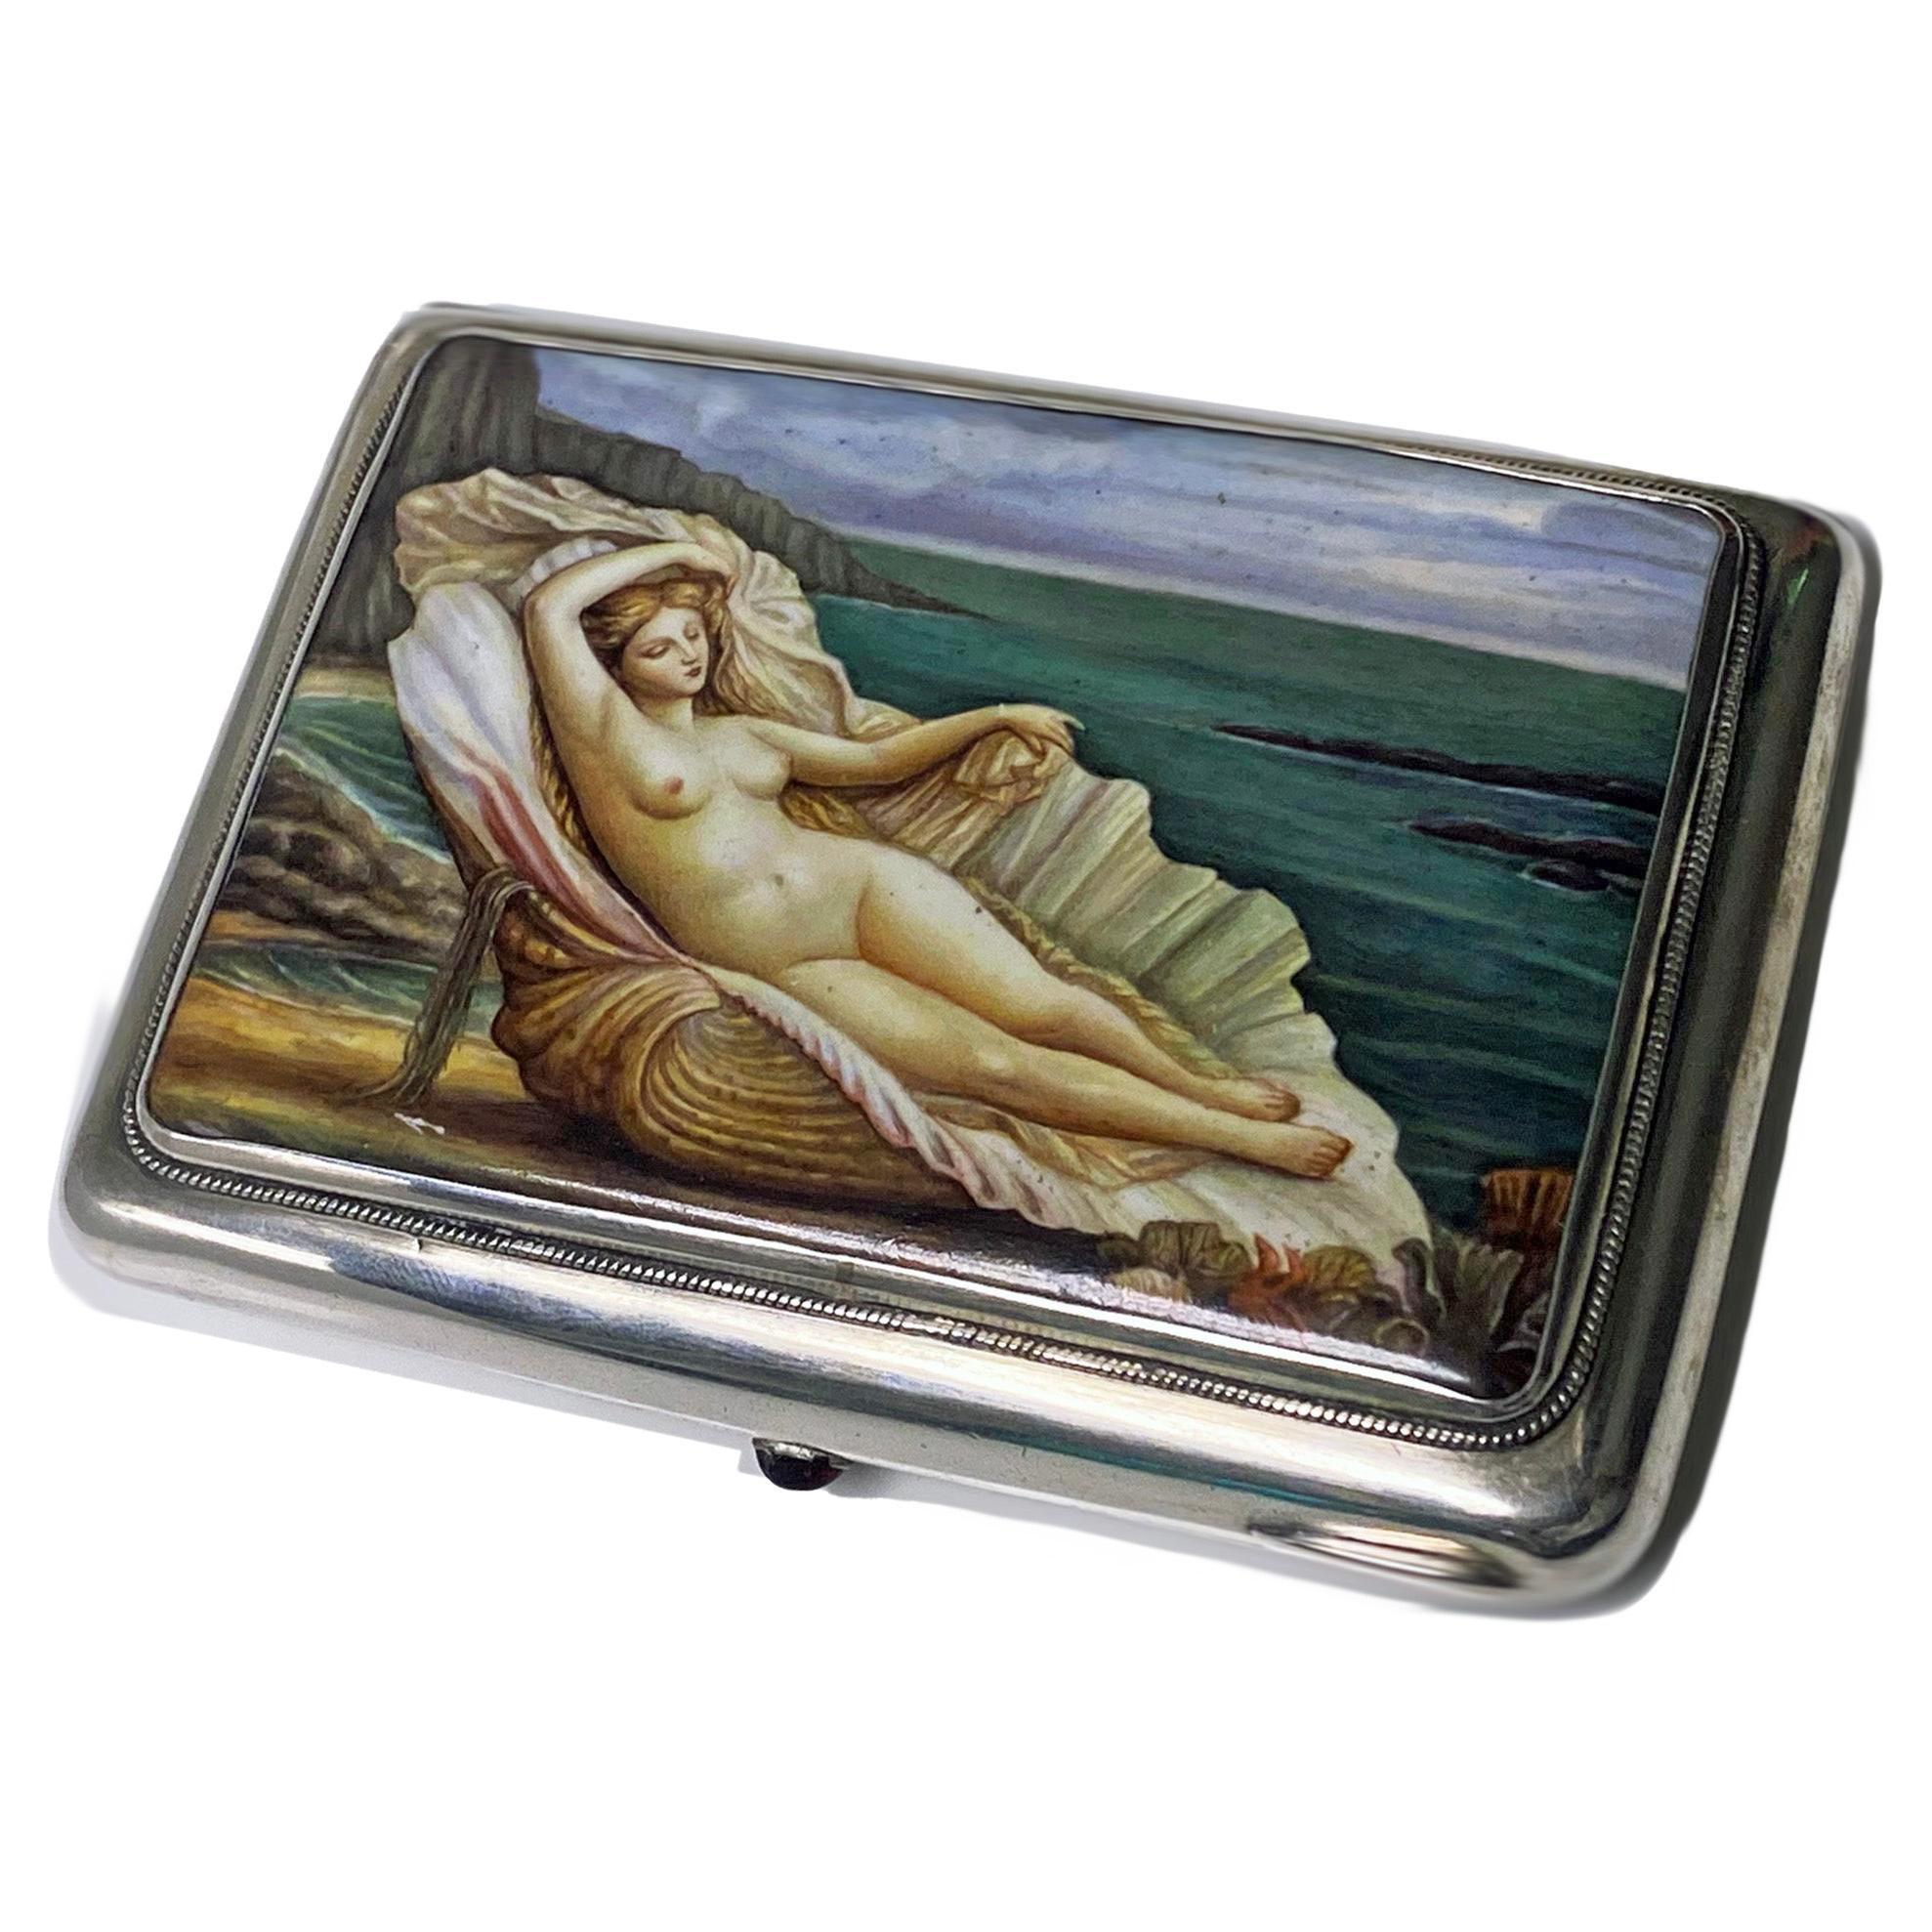 Antique Russian Silver enamel nude cigarette case box, Moscow C.1910. Makers mark for Konstantin Illarionovich Skvortsov and assay mark for Ivan Lebedkin. The cover hand painted enamel depicting Venus reclining in a scallop shell with background of